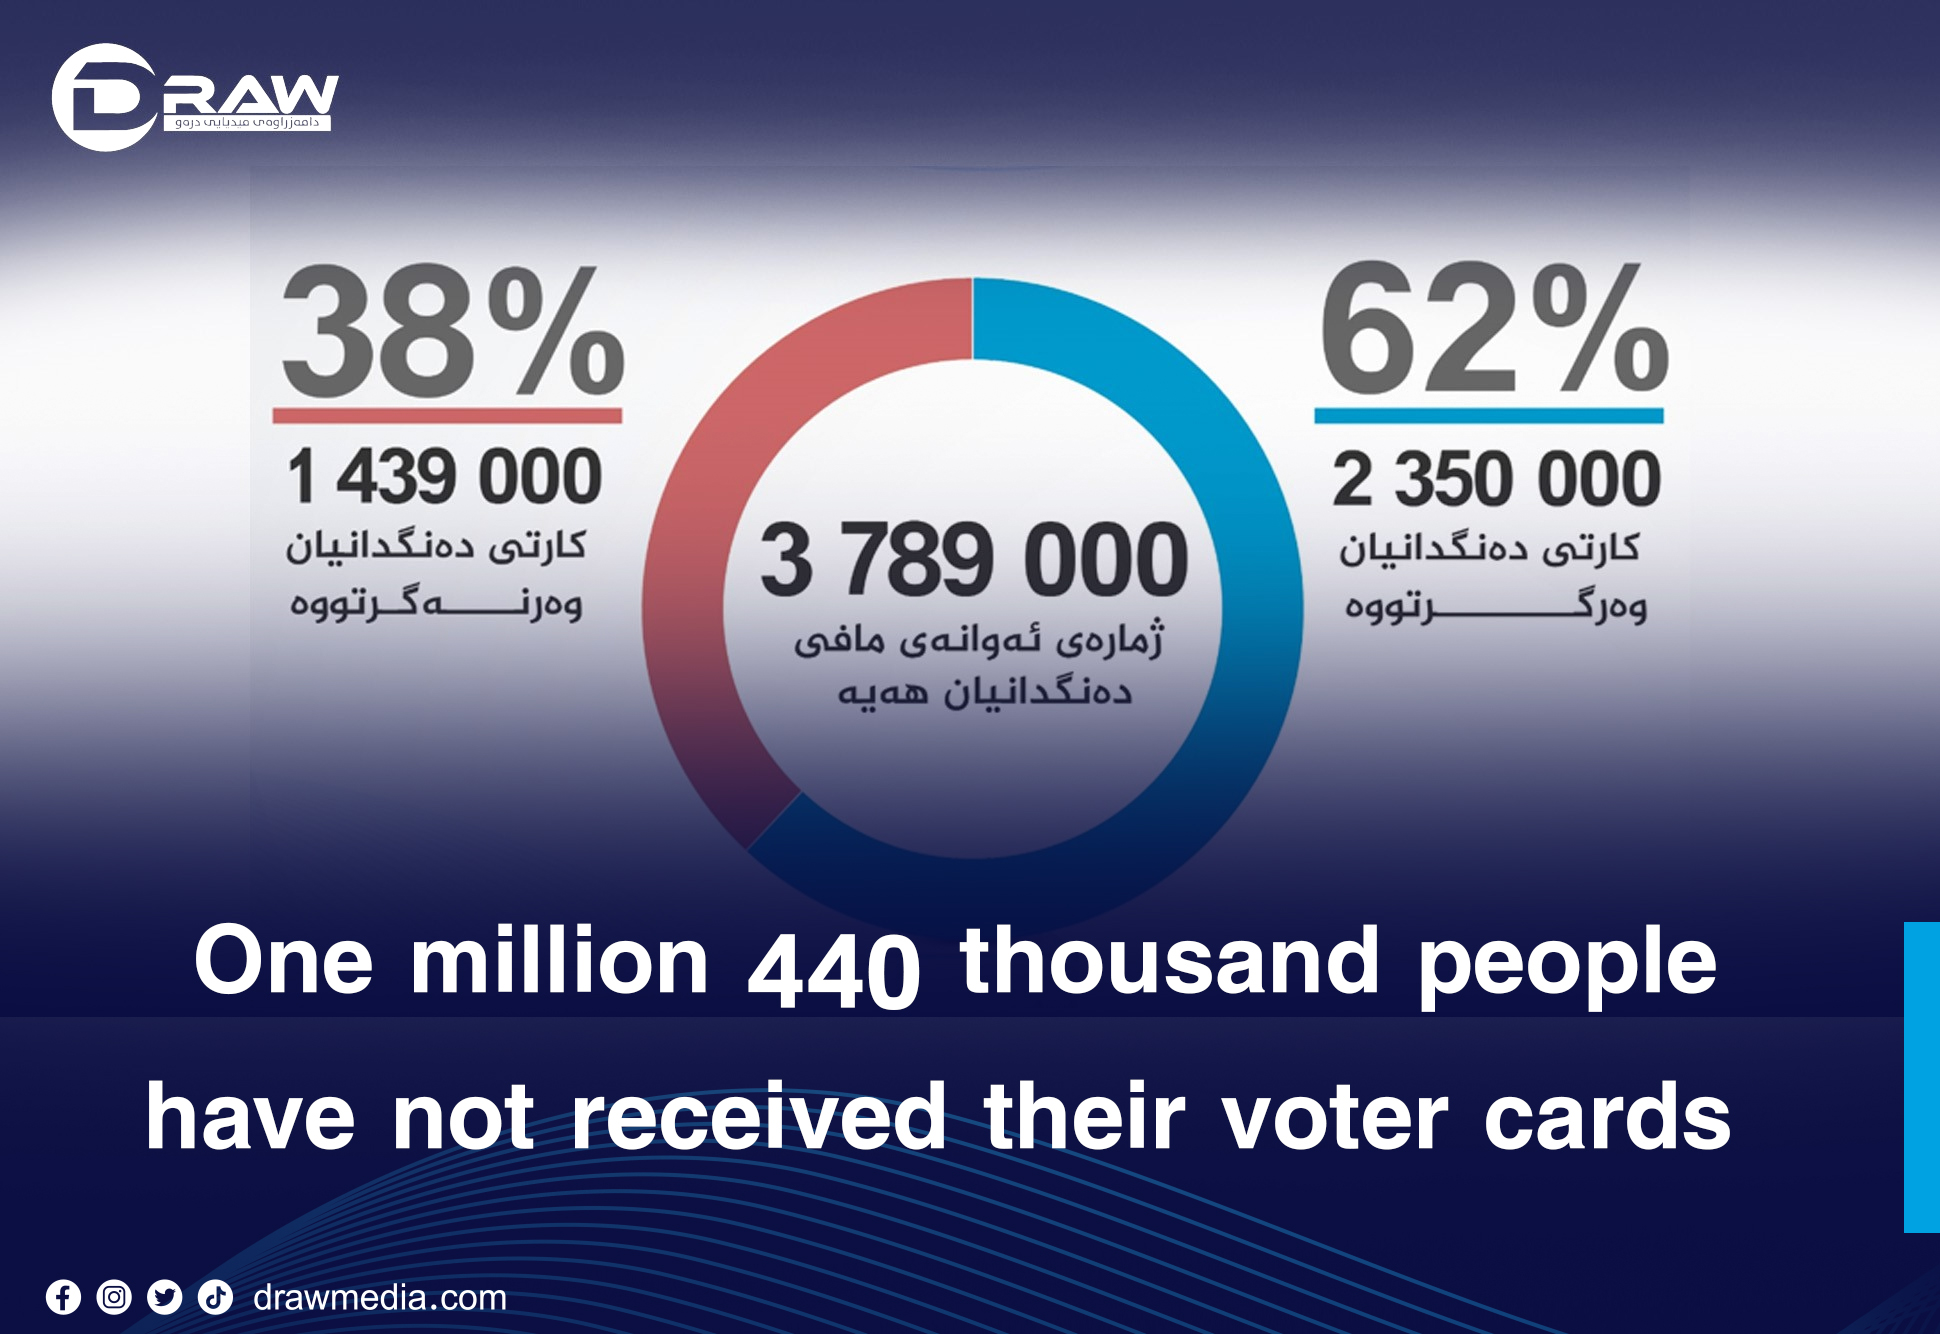 DrawMedia.net / One million 440 thousand people have not received their voter cards